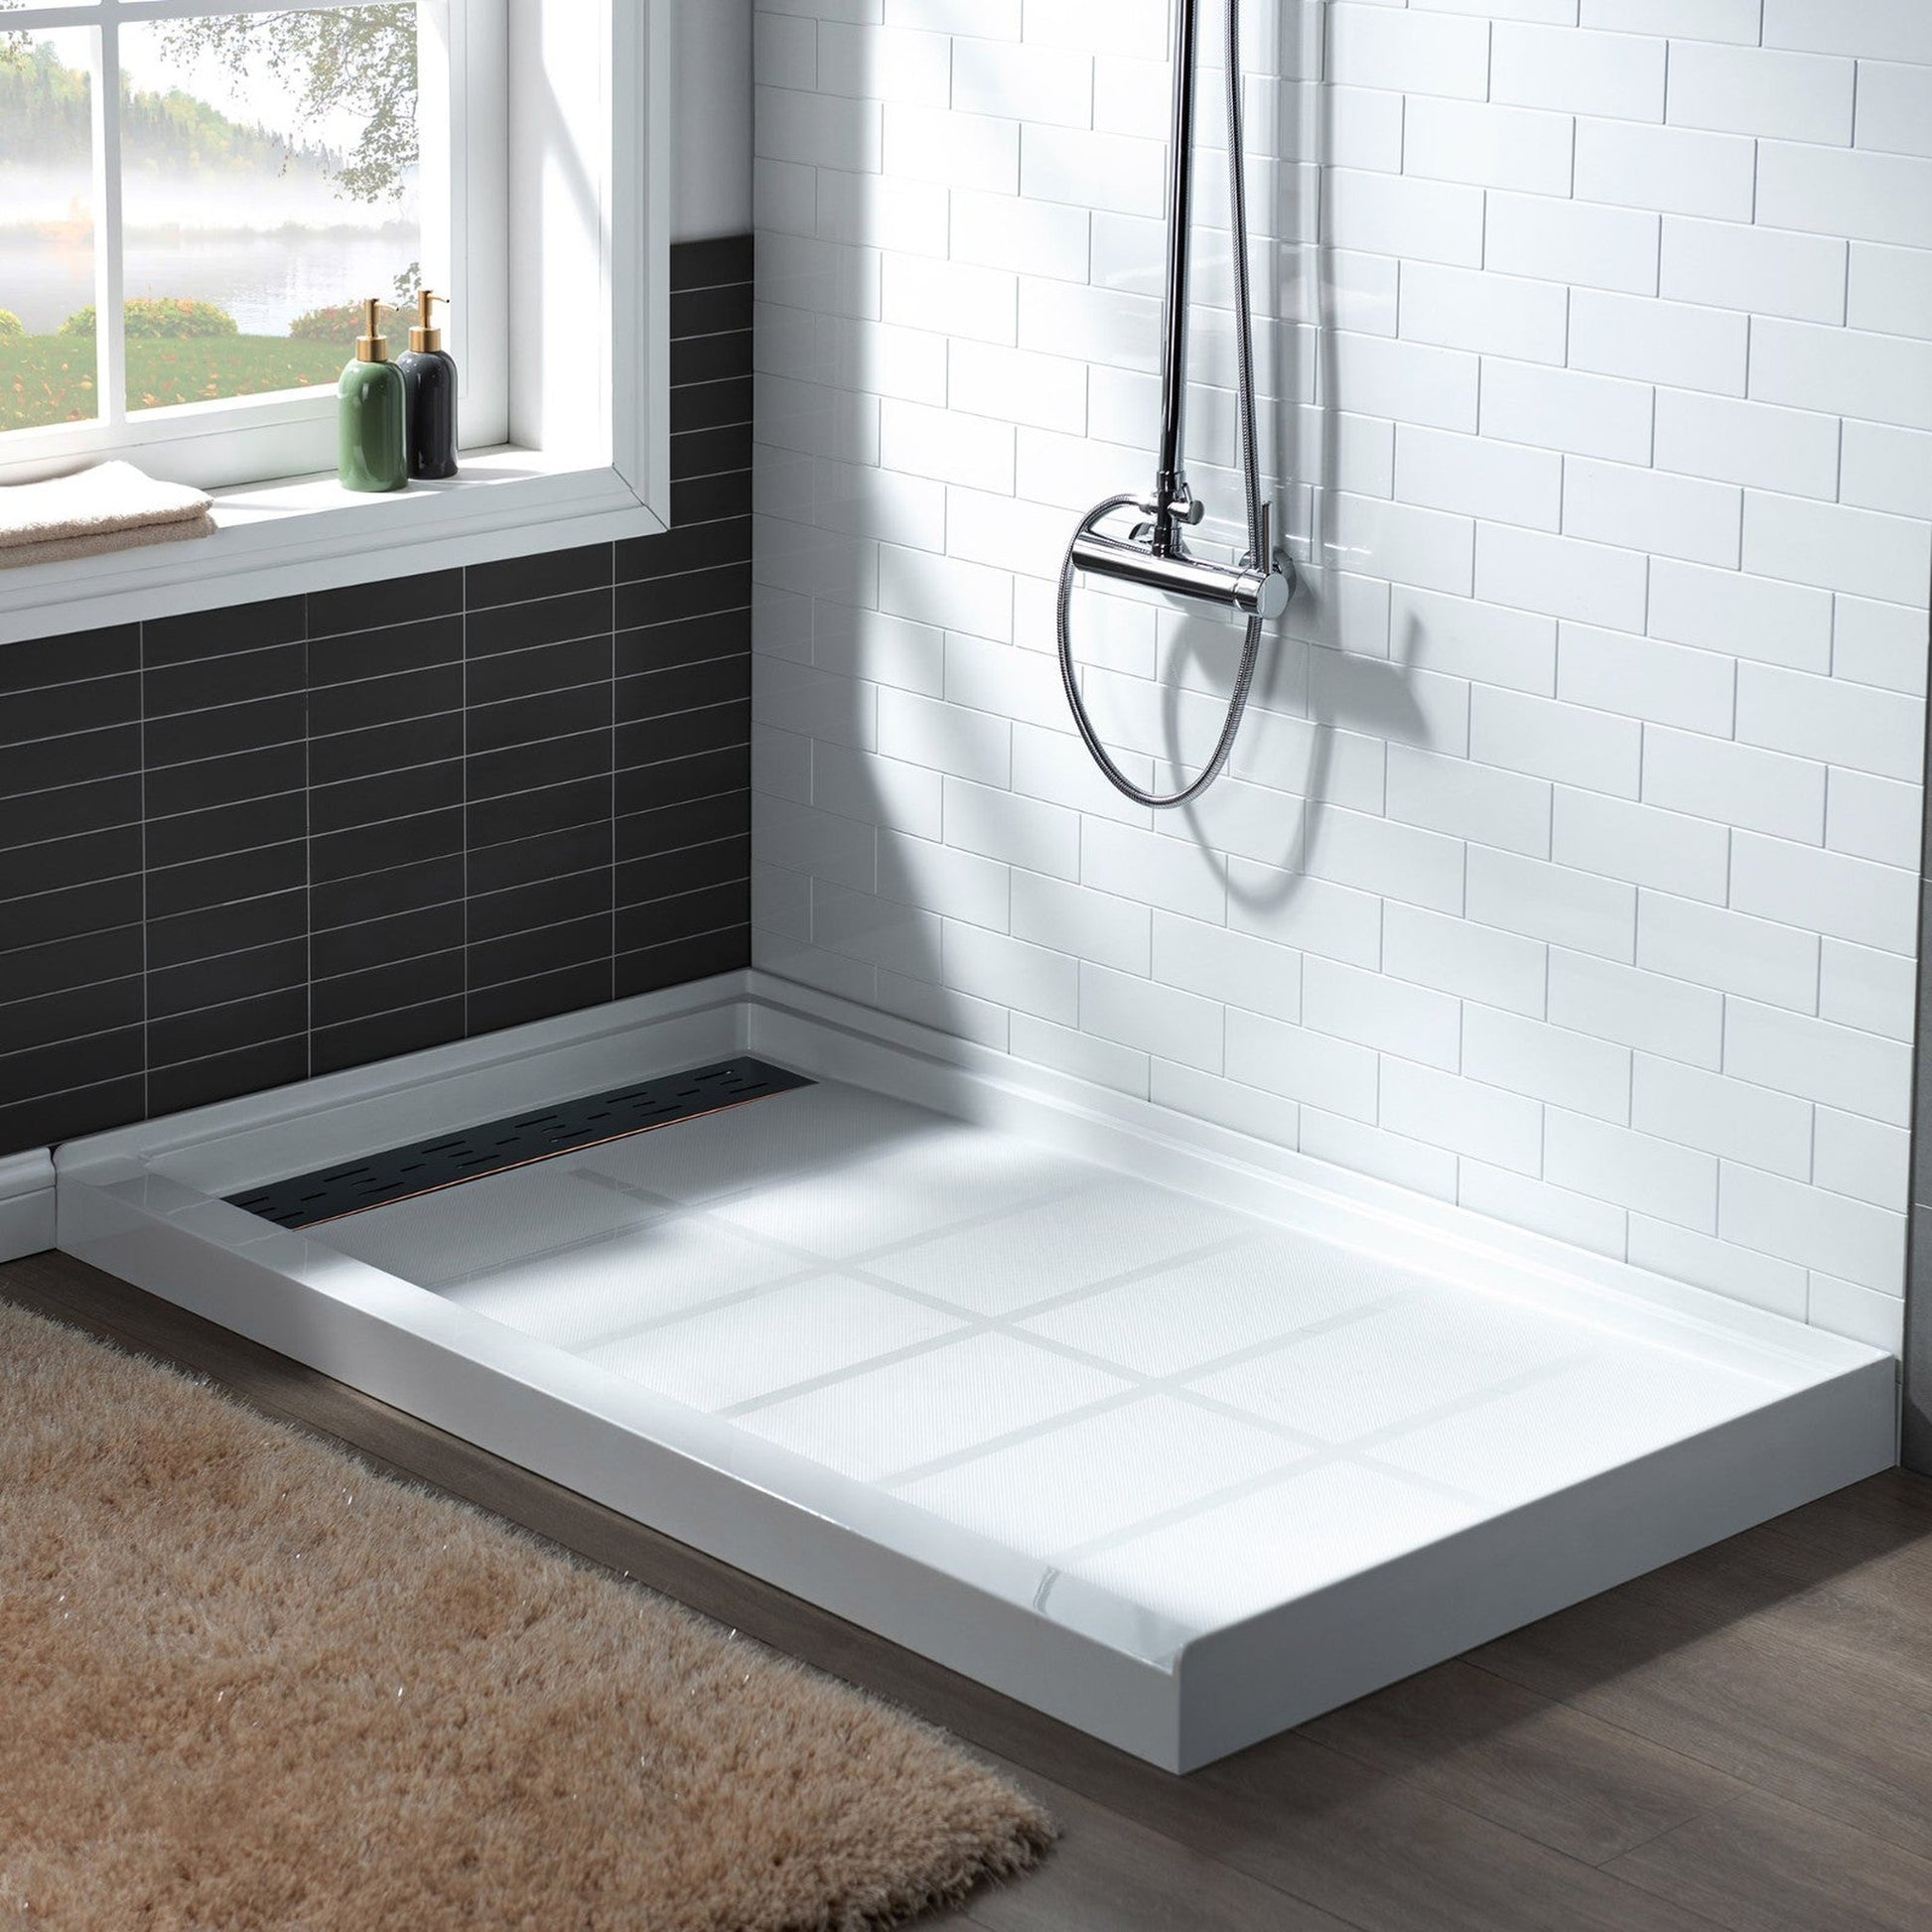 WoodBridge 60" x 34" White Solid Surface Shower Base Left Drain Location With Oil Rubbed Bronze Trench Drain Cover